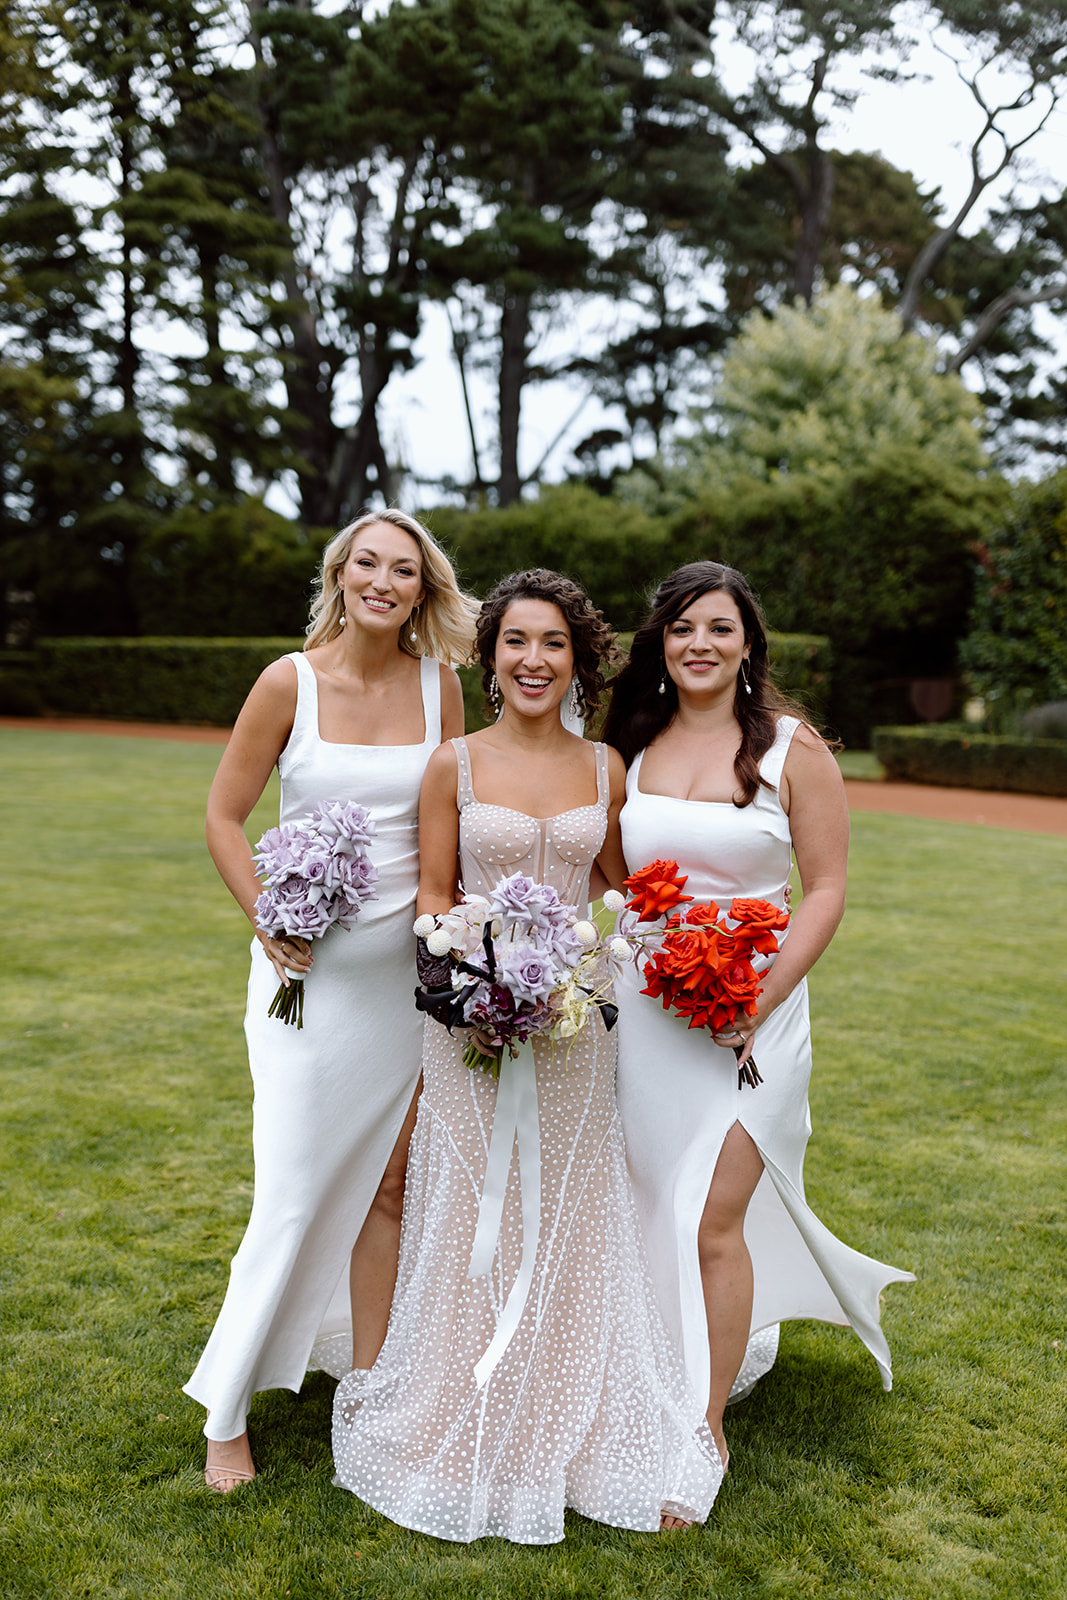 Bridge together with her bridesmaids at the wedding in the Southern Highlands Bendooley Estate